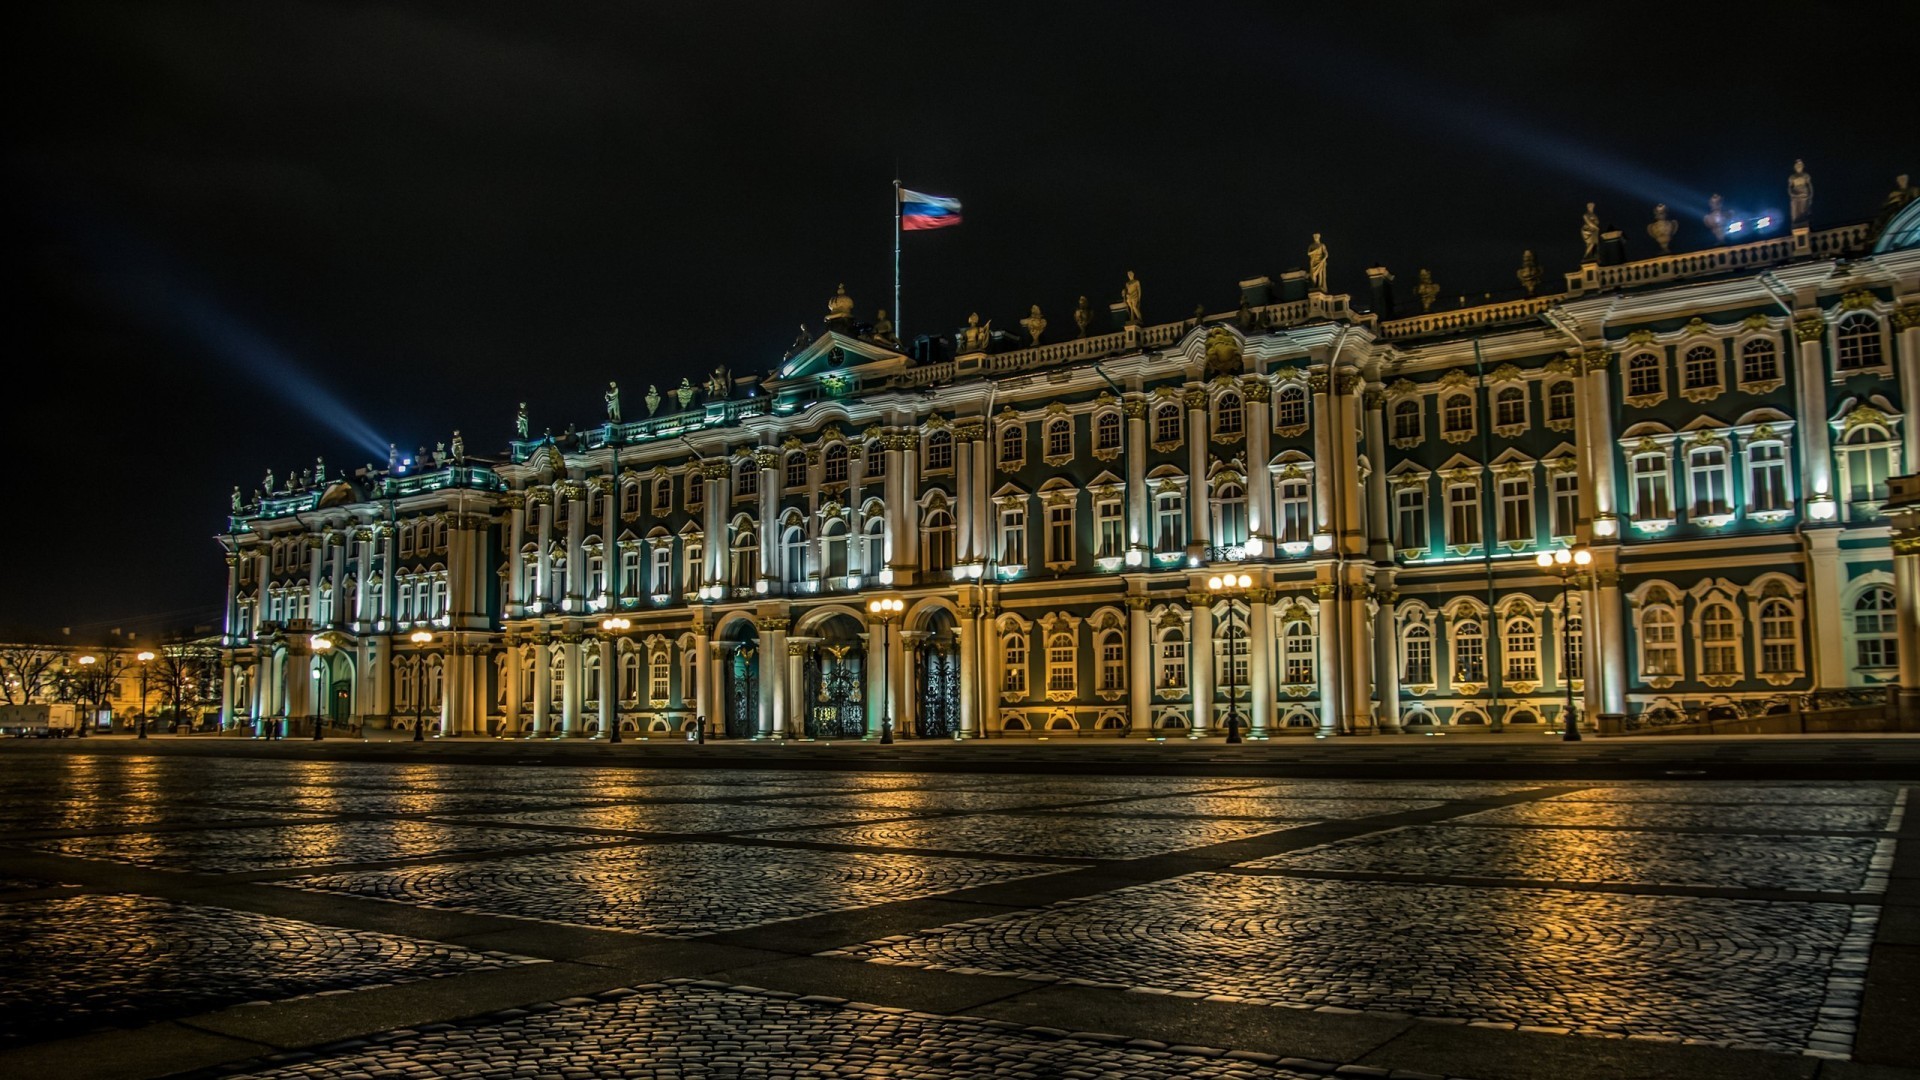 General 1920x1080 architecture flag night building Russia St. Petersburg Hermitage historical buildings